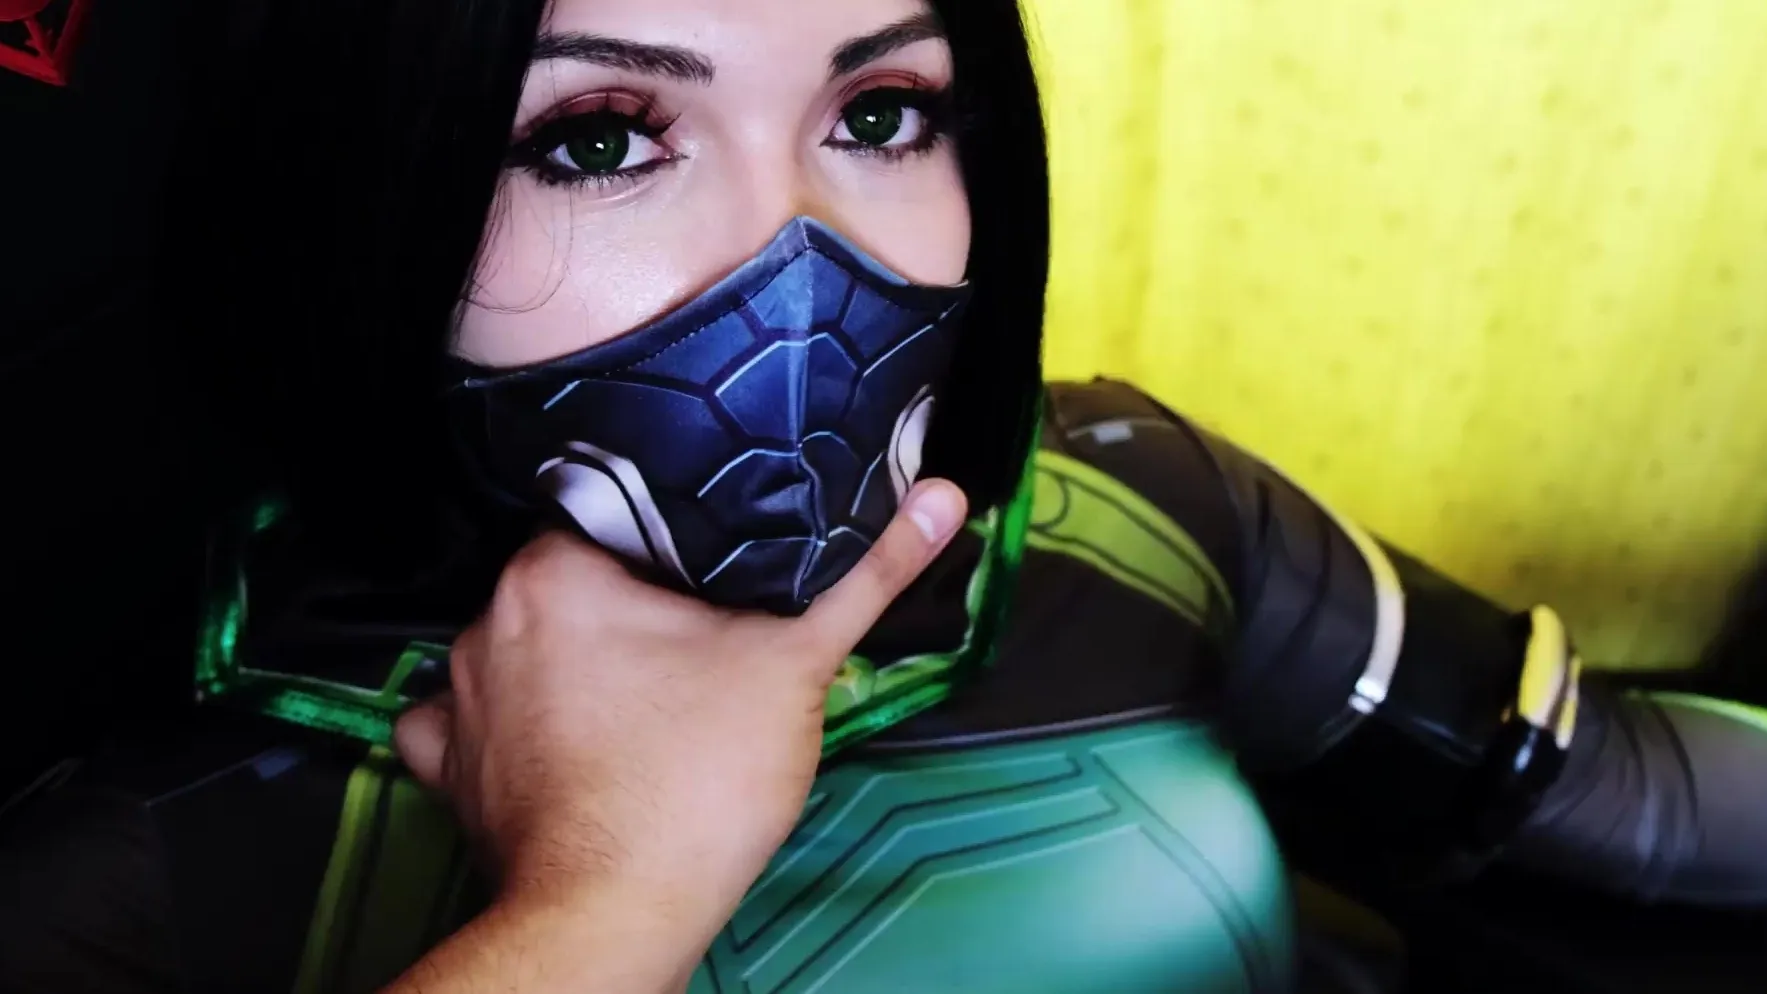 Hot animated babe Valorant-Viper Cosplay XXX video picture